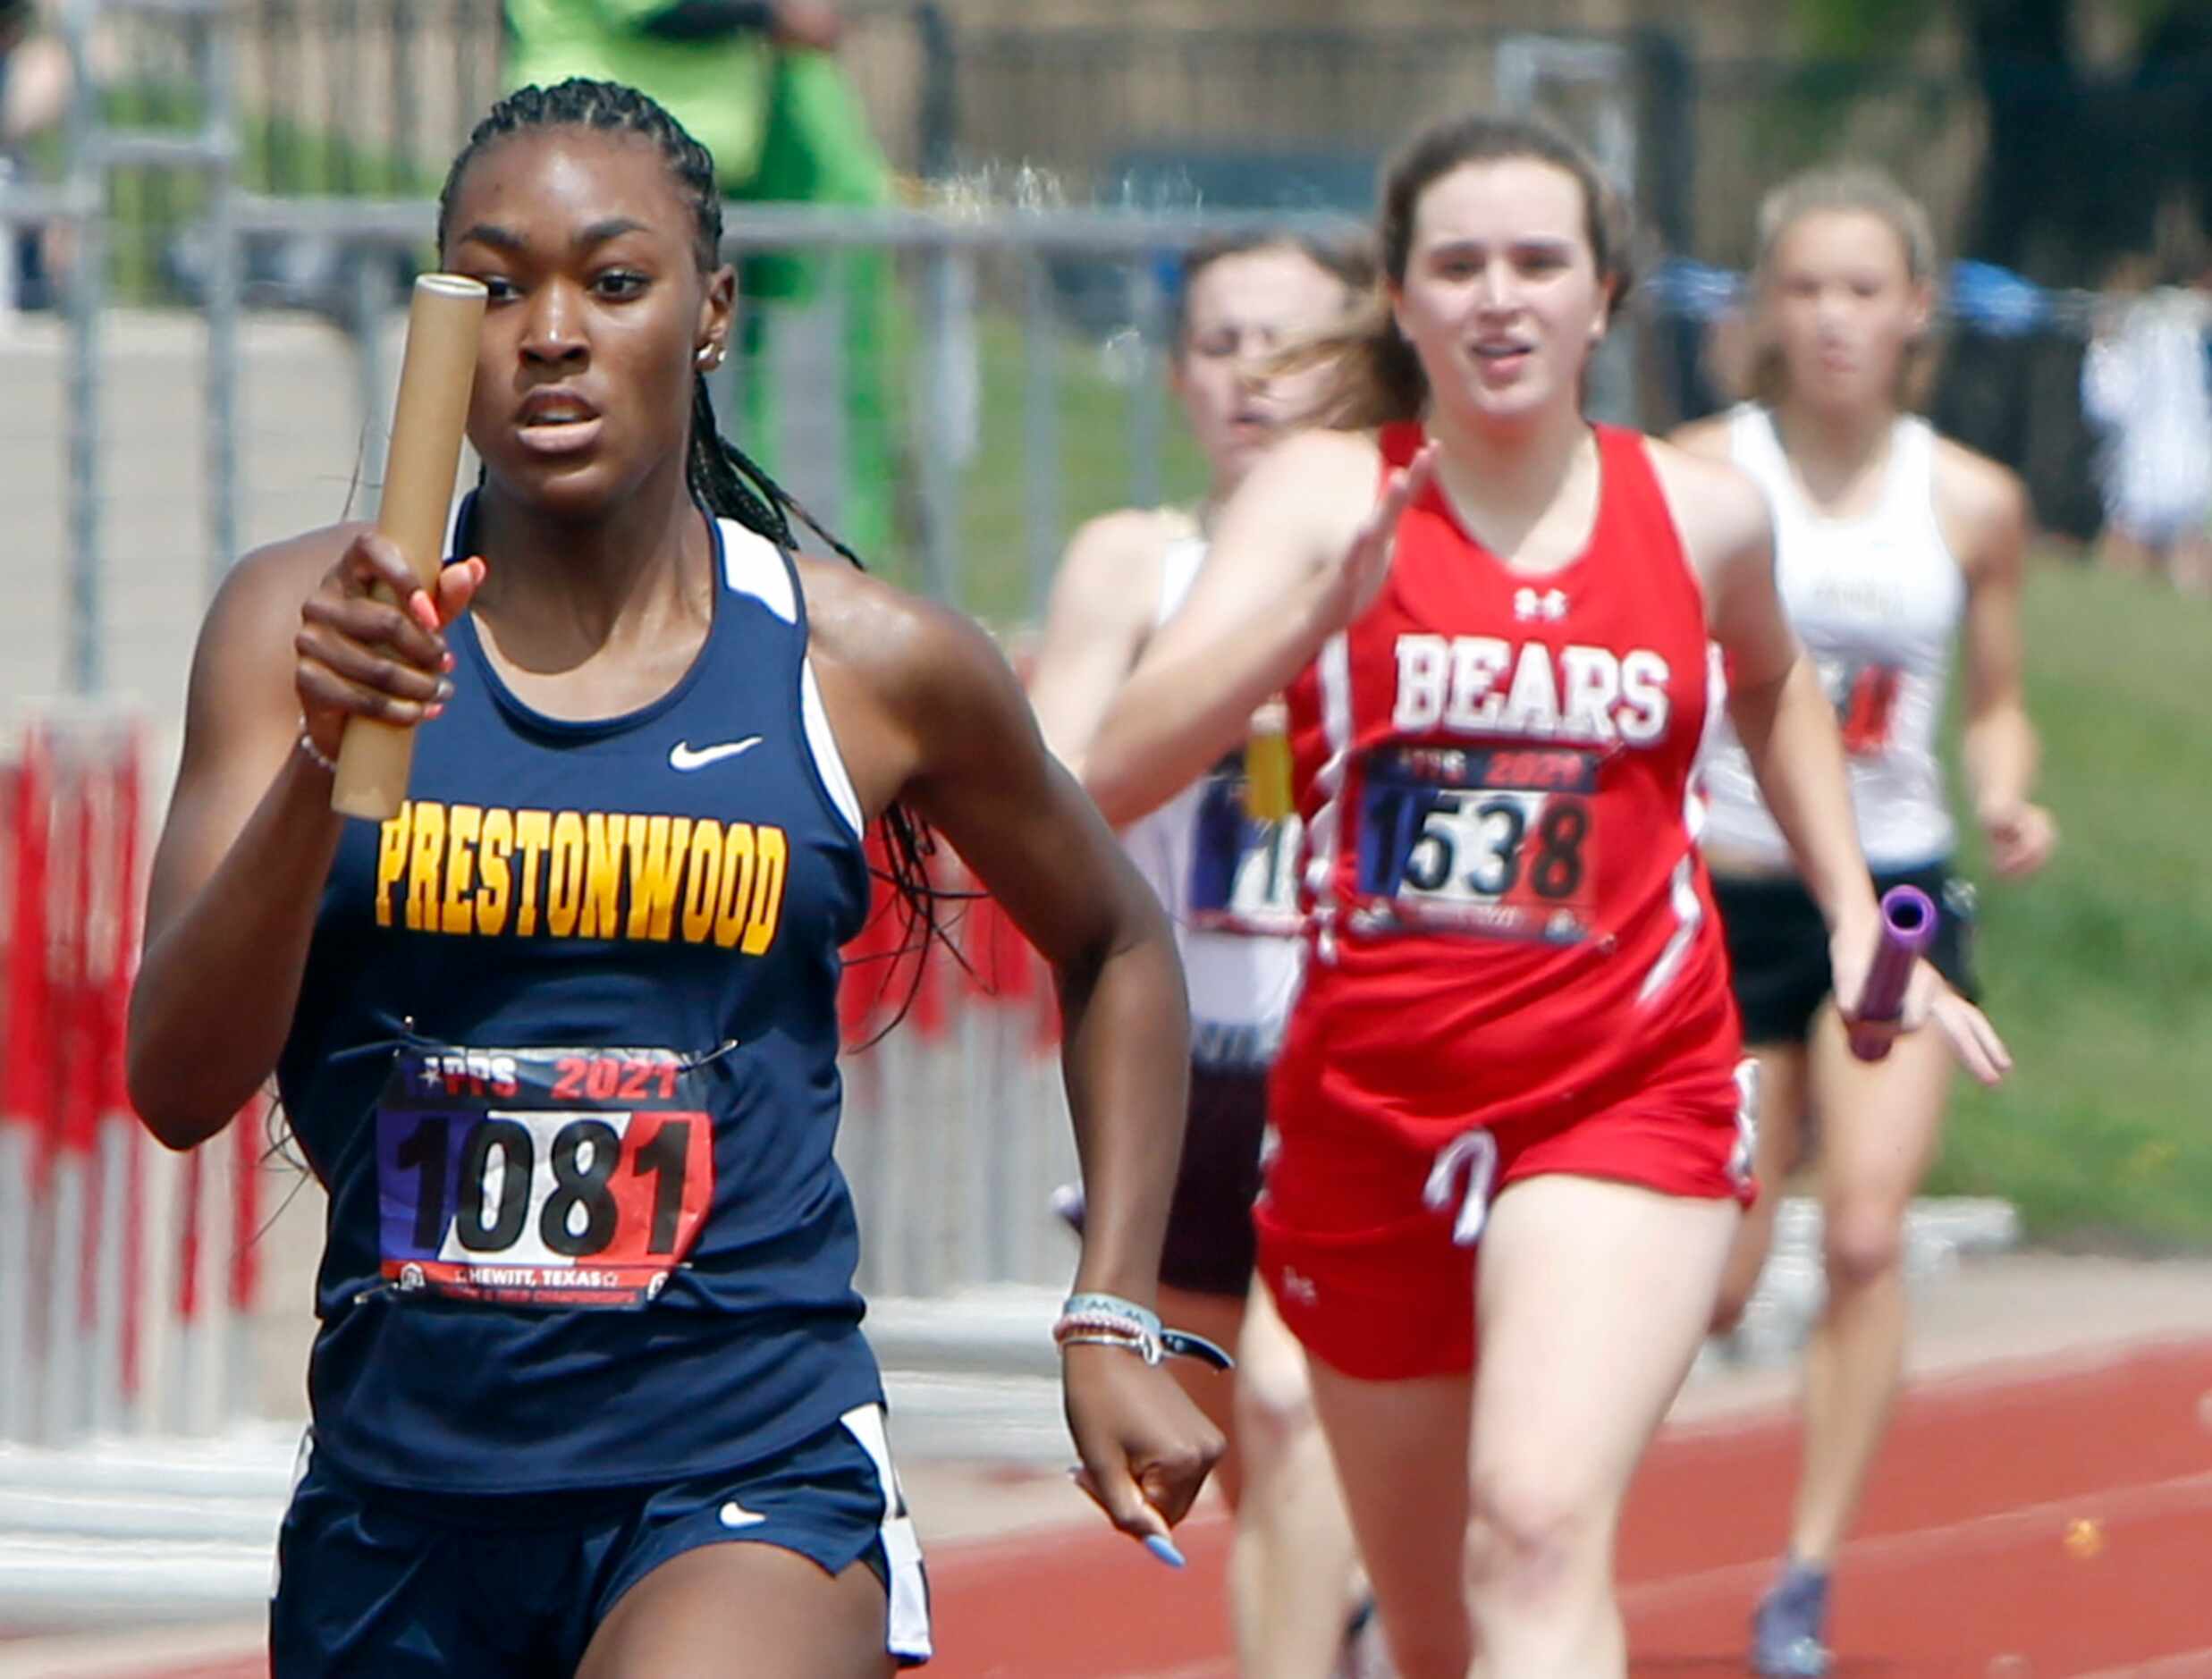 Prestonwood sprinter Nadia Thomas carries the baton for a first place finish as the anchor...